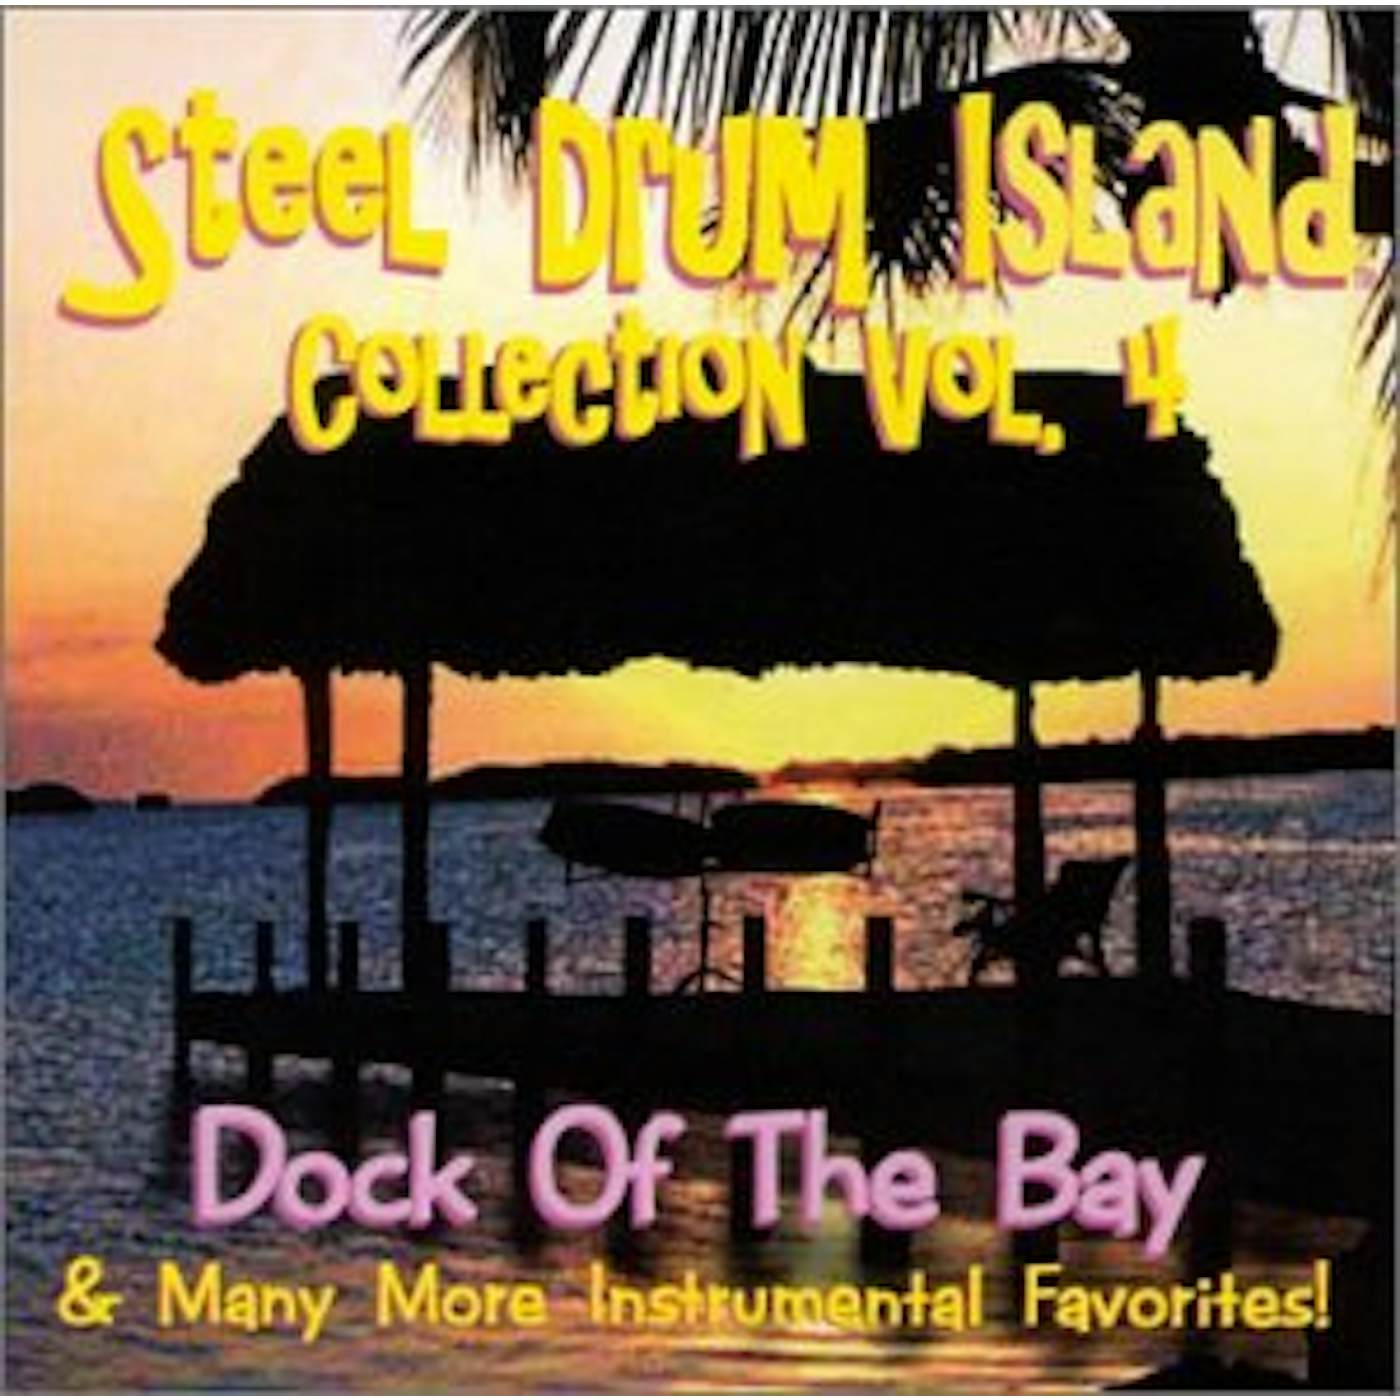 STEEL DRUM ISLAND COLLECTION: DOCK OF THE BAY & MO CD